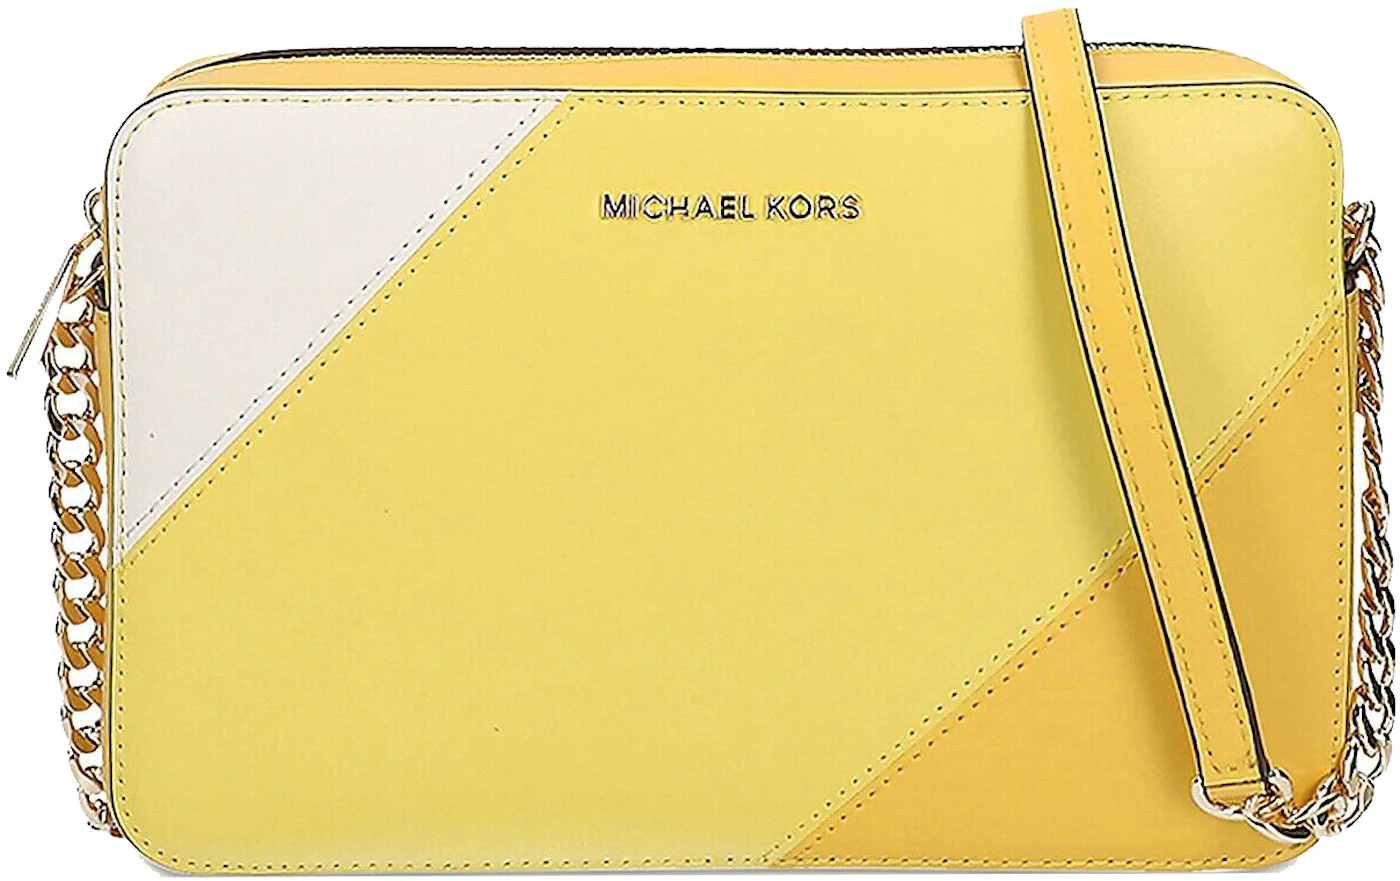 Michael Kors Gusset Crossbody Bag Large Yellow in PVC/Leather with Gold ...